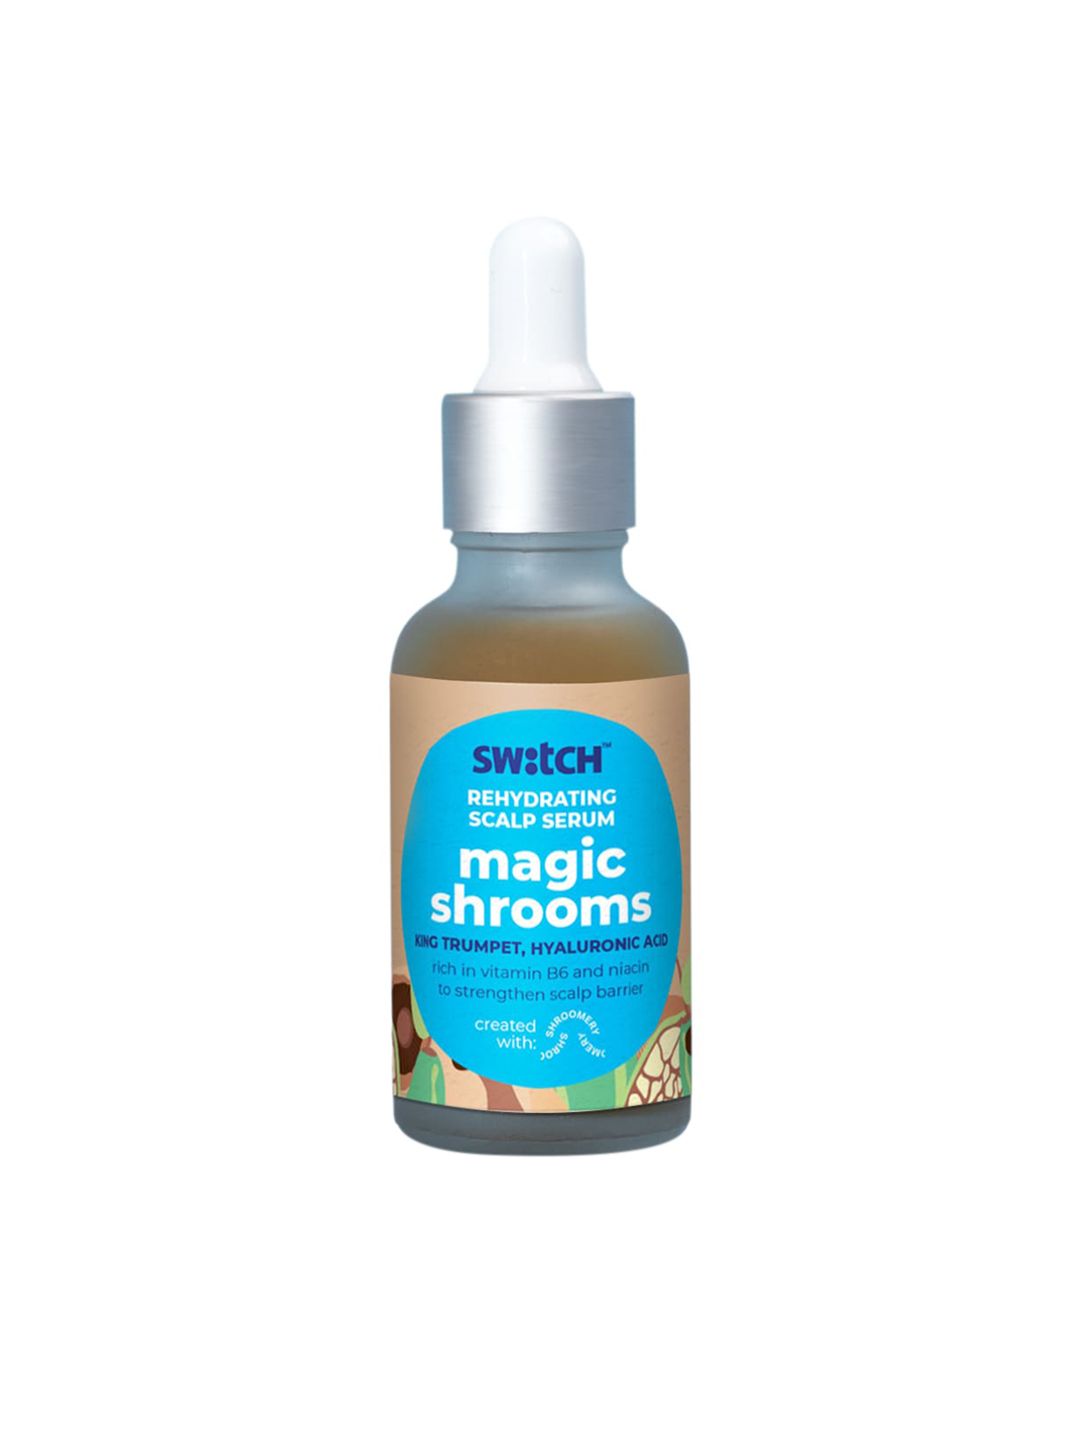 The Switch Fix Rehydrating Magic Shrooms Scalp Serum for Dehydrated Hair - 30ml Price in India